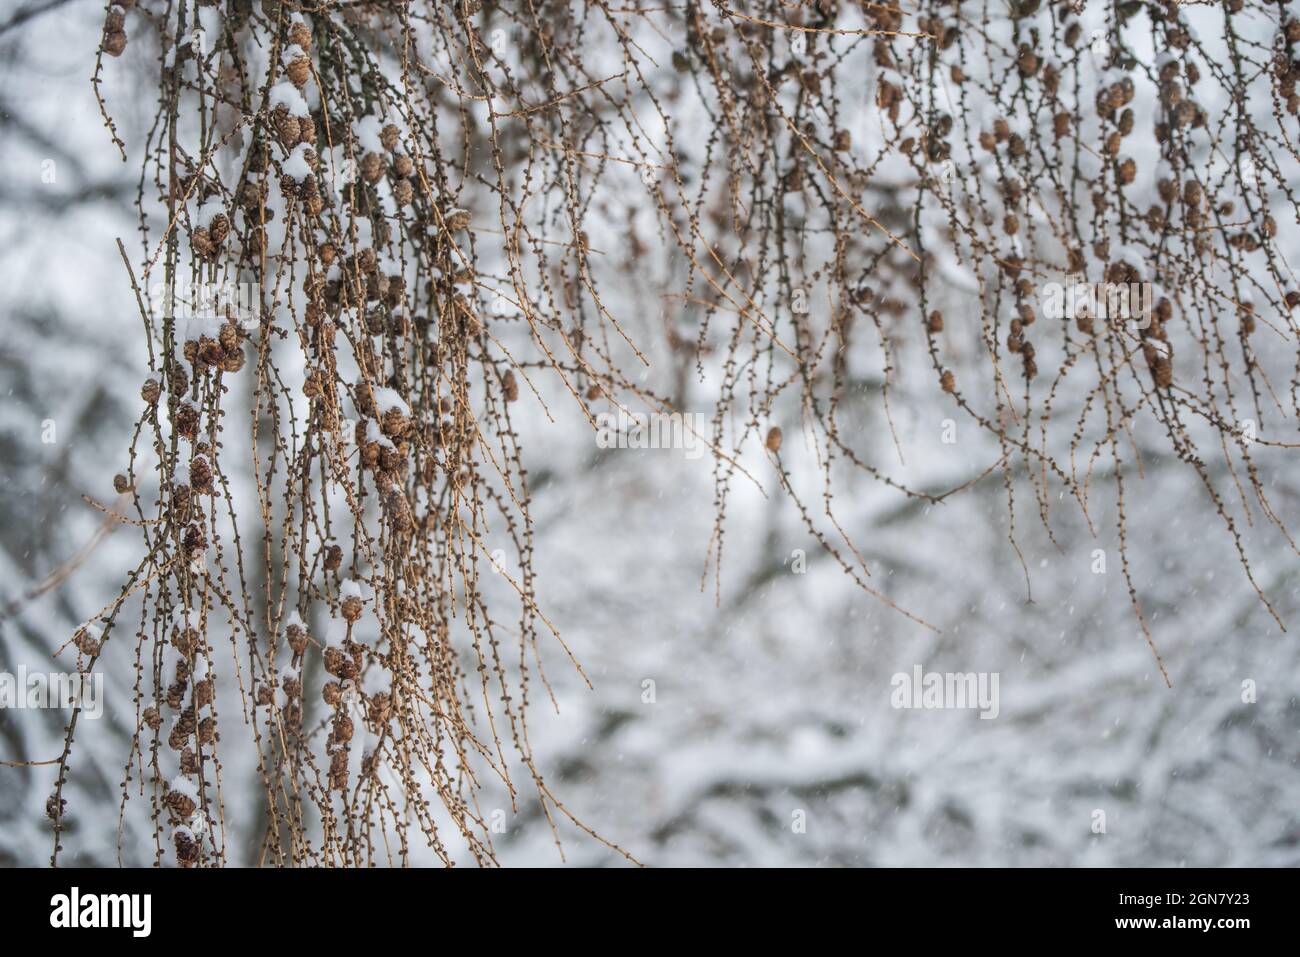 Tree branches with small cones on a winter background Stock Photo